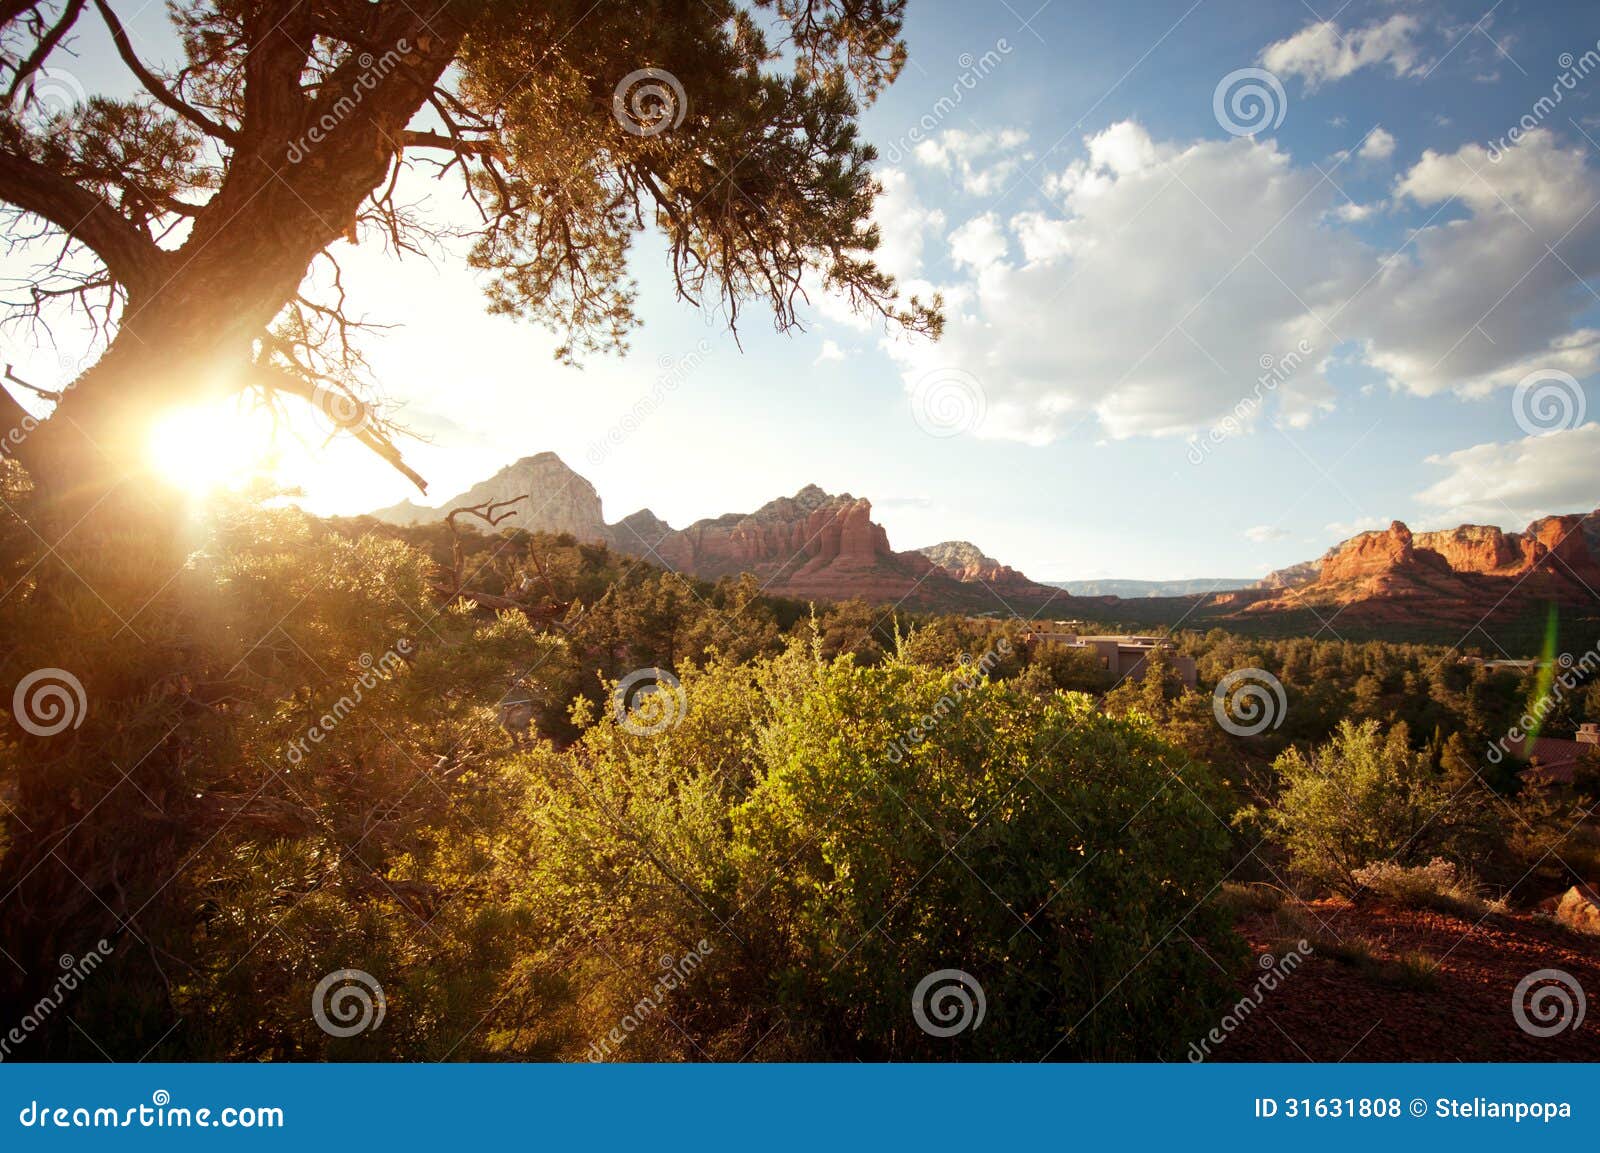 landscape scene of red rock mountains with sunlight